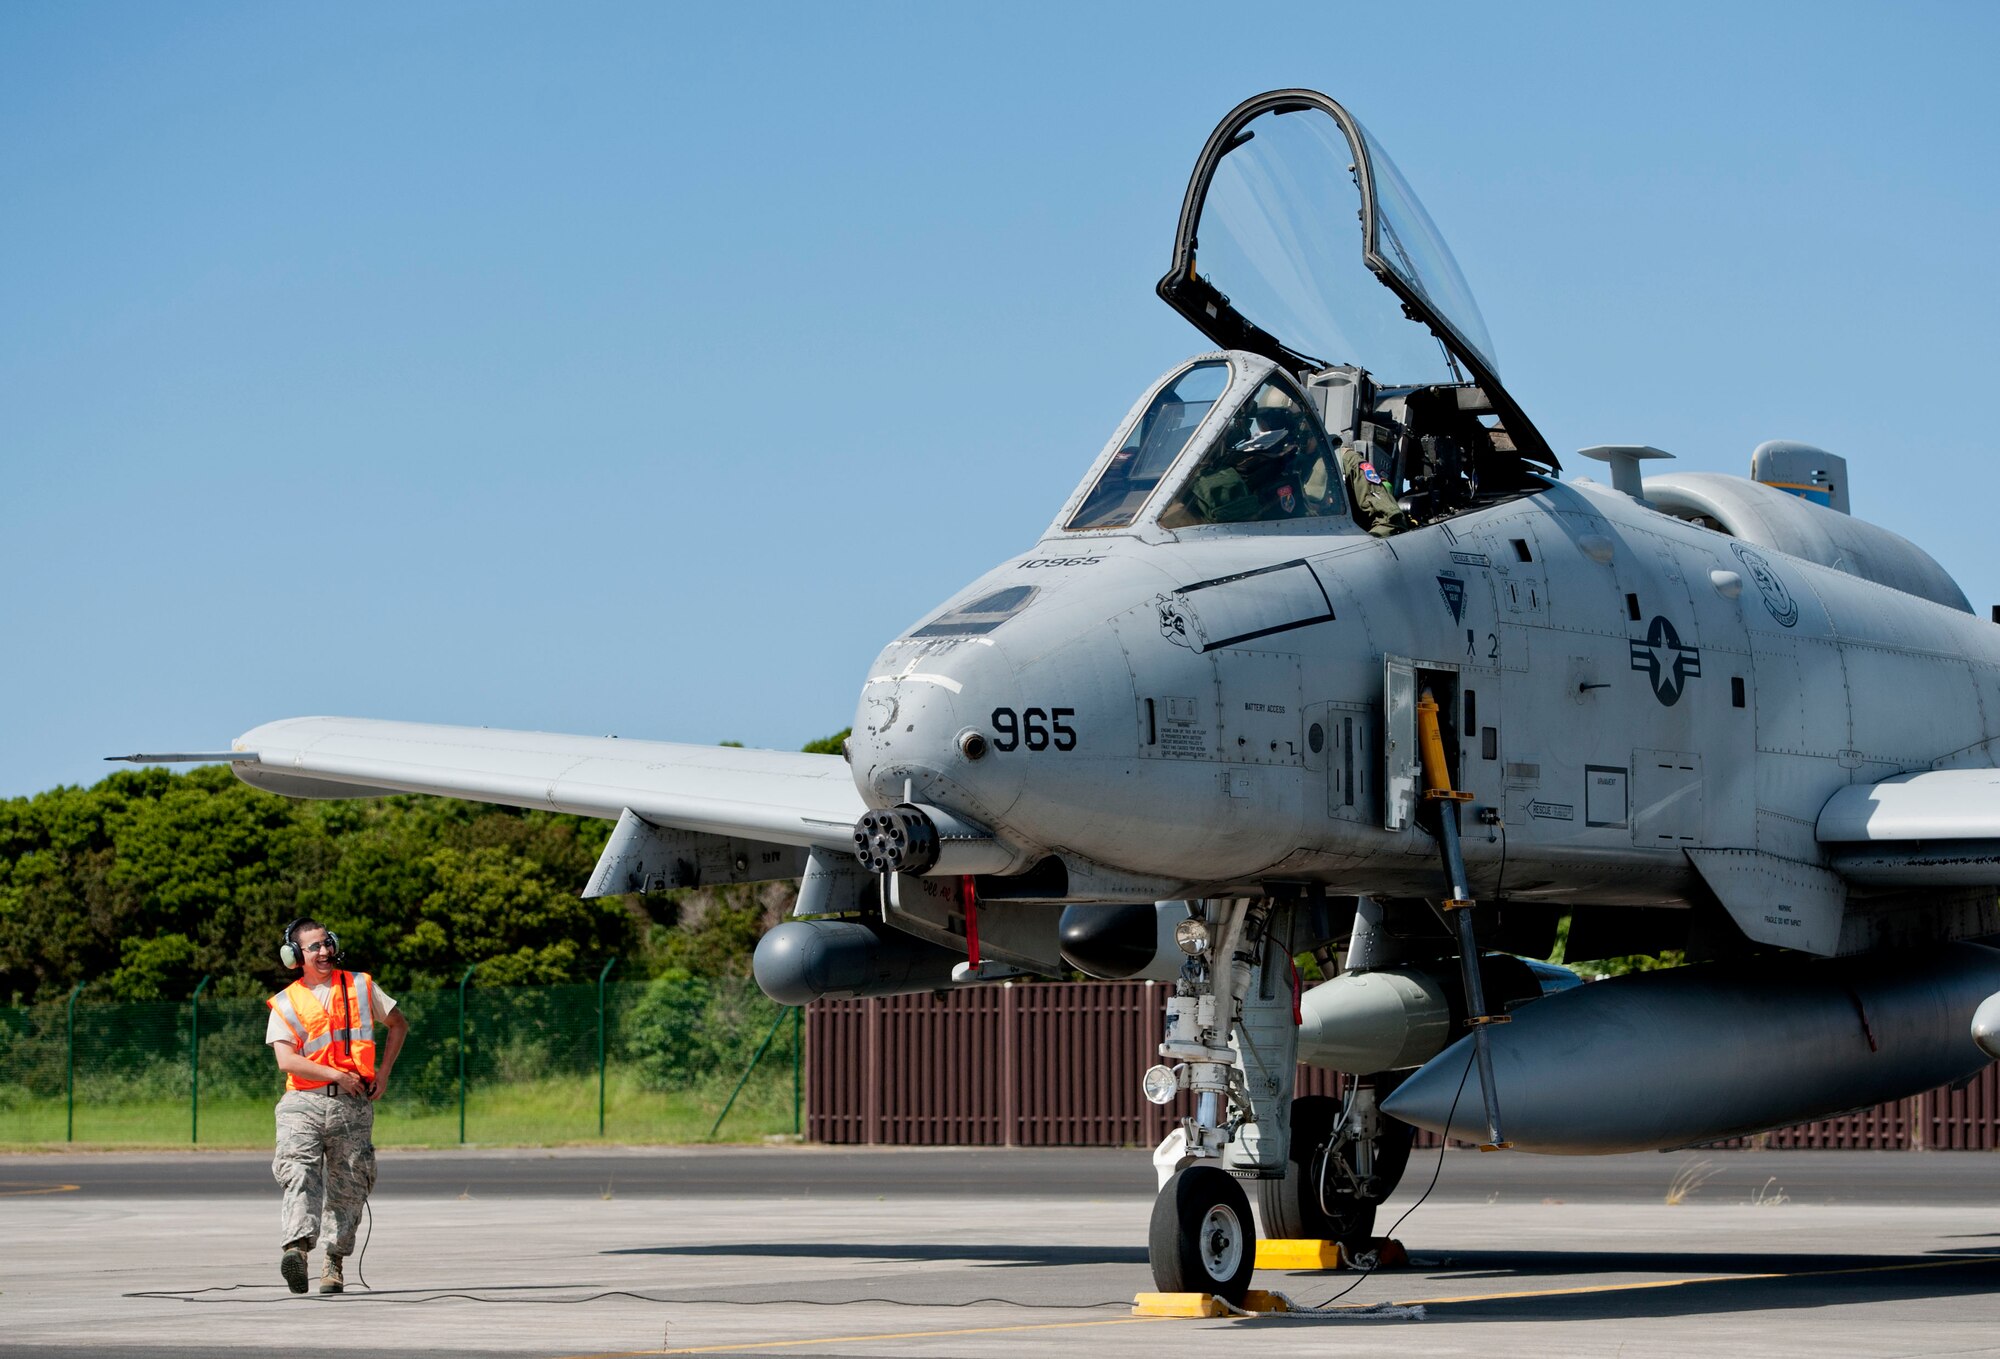 Staff Sgt. Chris Zamora, a 65th Operations Support Squadron transient alert maintenance technician, performs shutdown procedures on an A-10 Thunderbolt II on Lajes Field, Azores, Portugal, August 1, 2015. The 354th Expeditionary Fighter Squadron returns home after deploying 12 A-10s as part of a Theater Security Package in support of Operation Atlantic Resolve, to Spangdahlem AB, Germany where they conducted training alongside our NATO allies to strengthen interoperability and to demonstrate U.S. commitment to the security and stability of Europe. (U.S. Air Force photo by Master Sgt. Bradley C. Church).